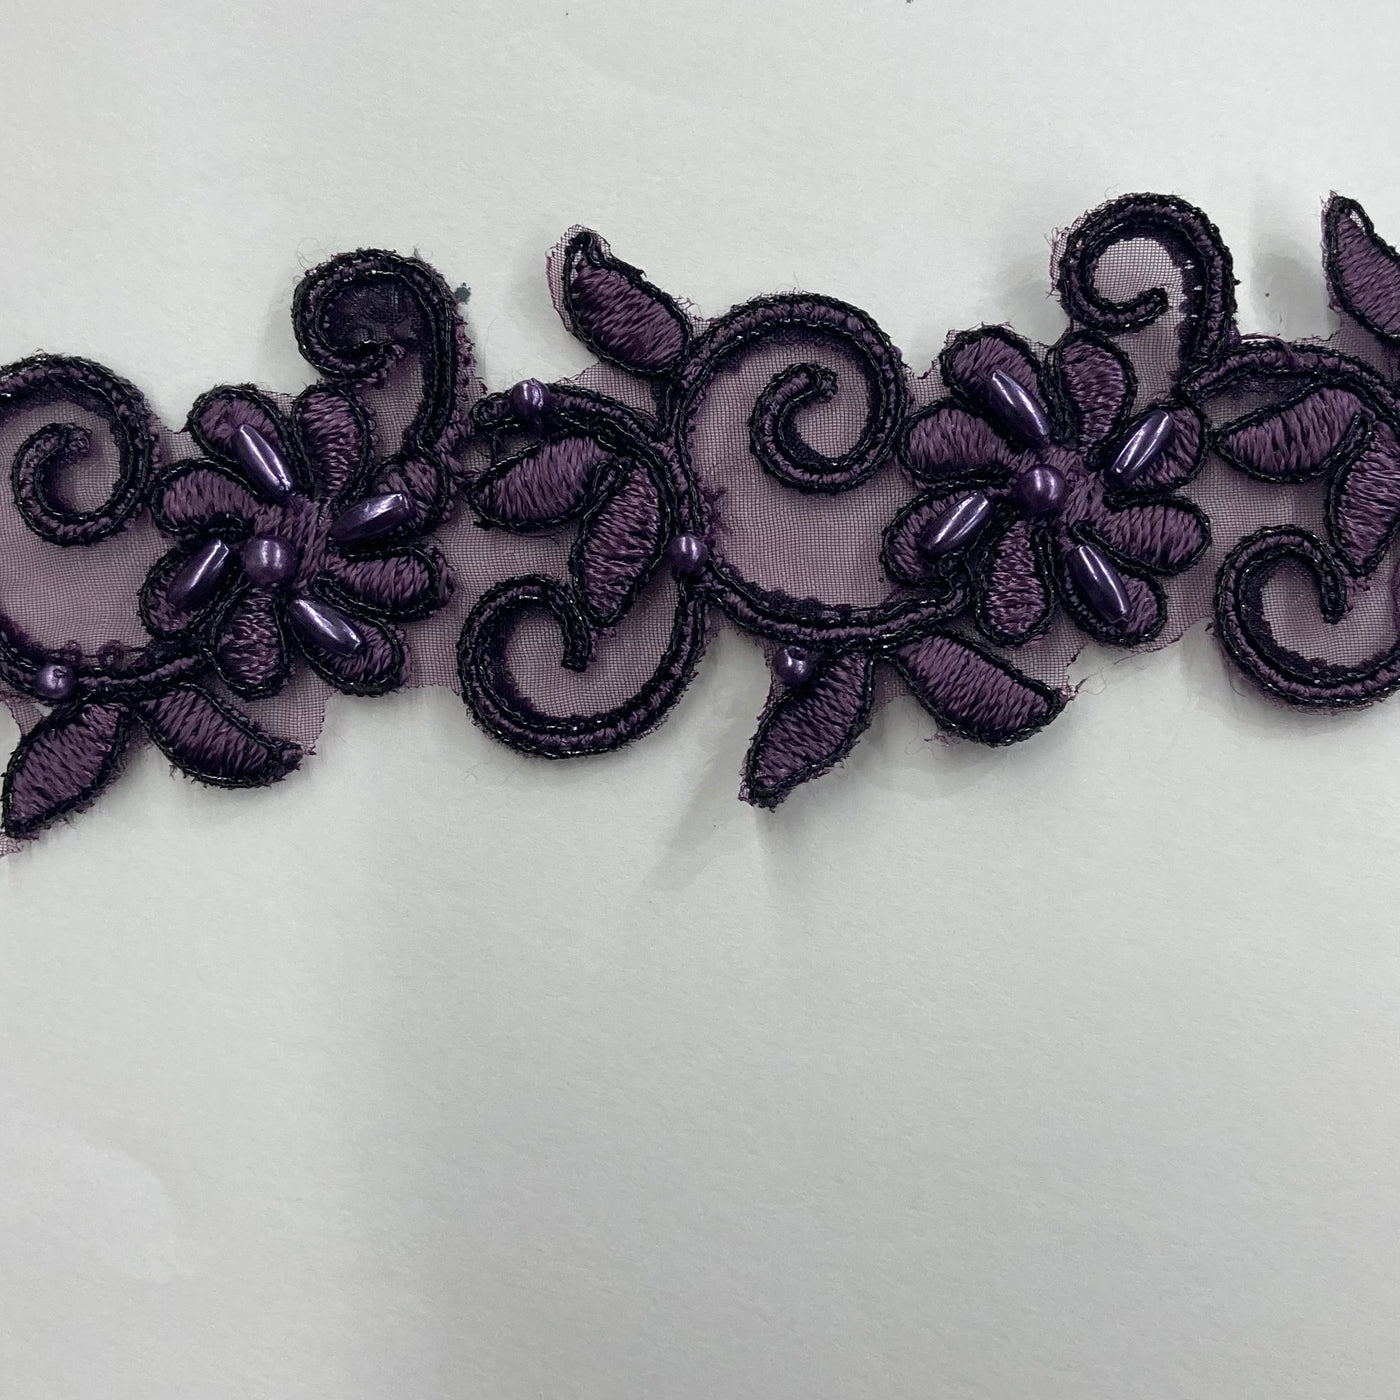 Beaded, Corded & Embroidered Metallic Plum Trimming. Lace Usa